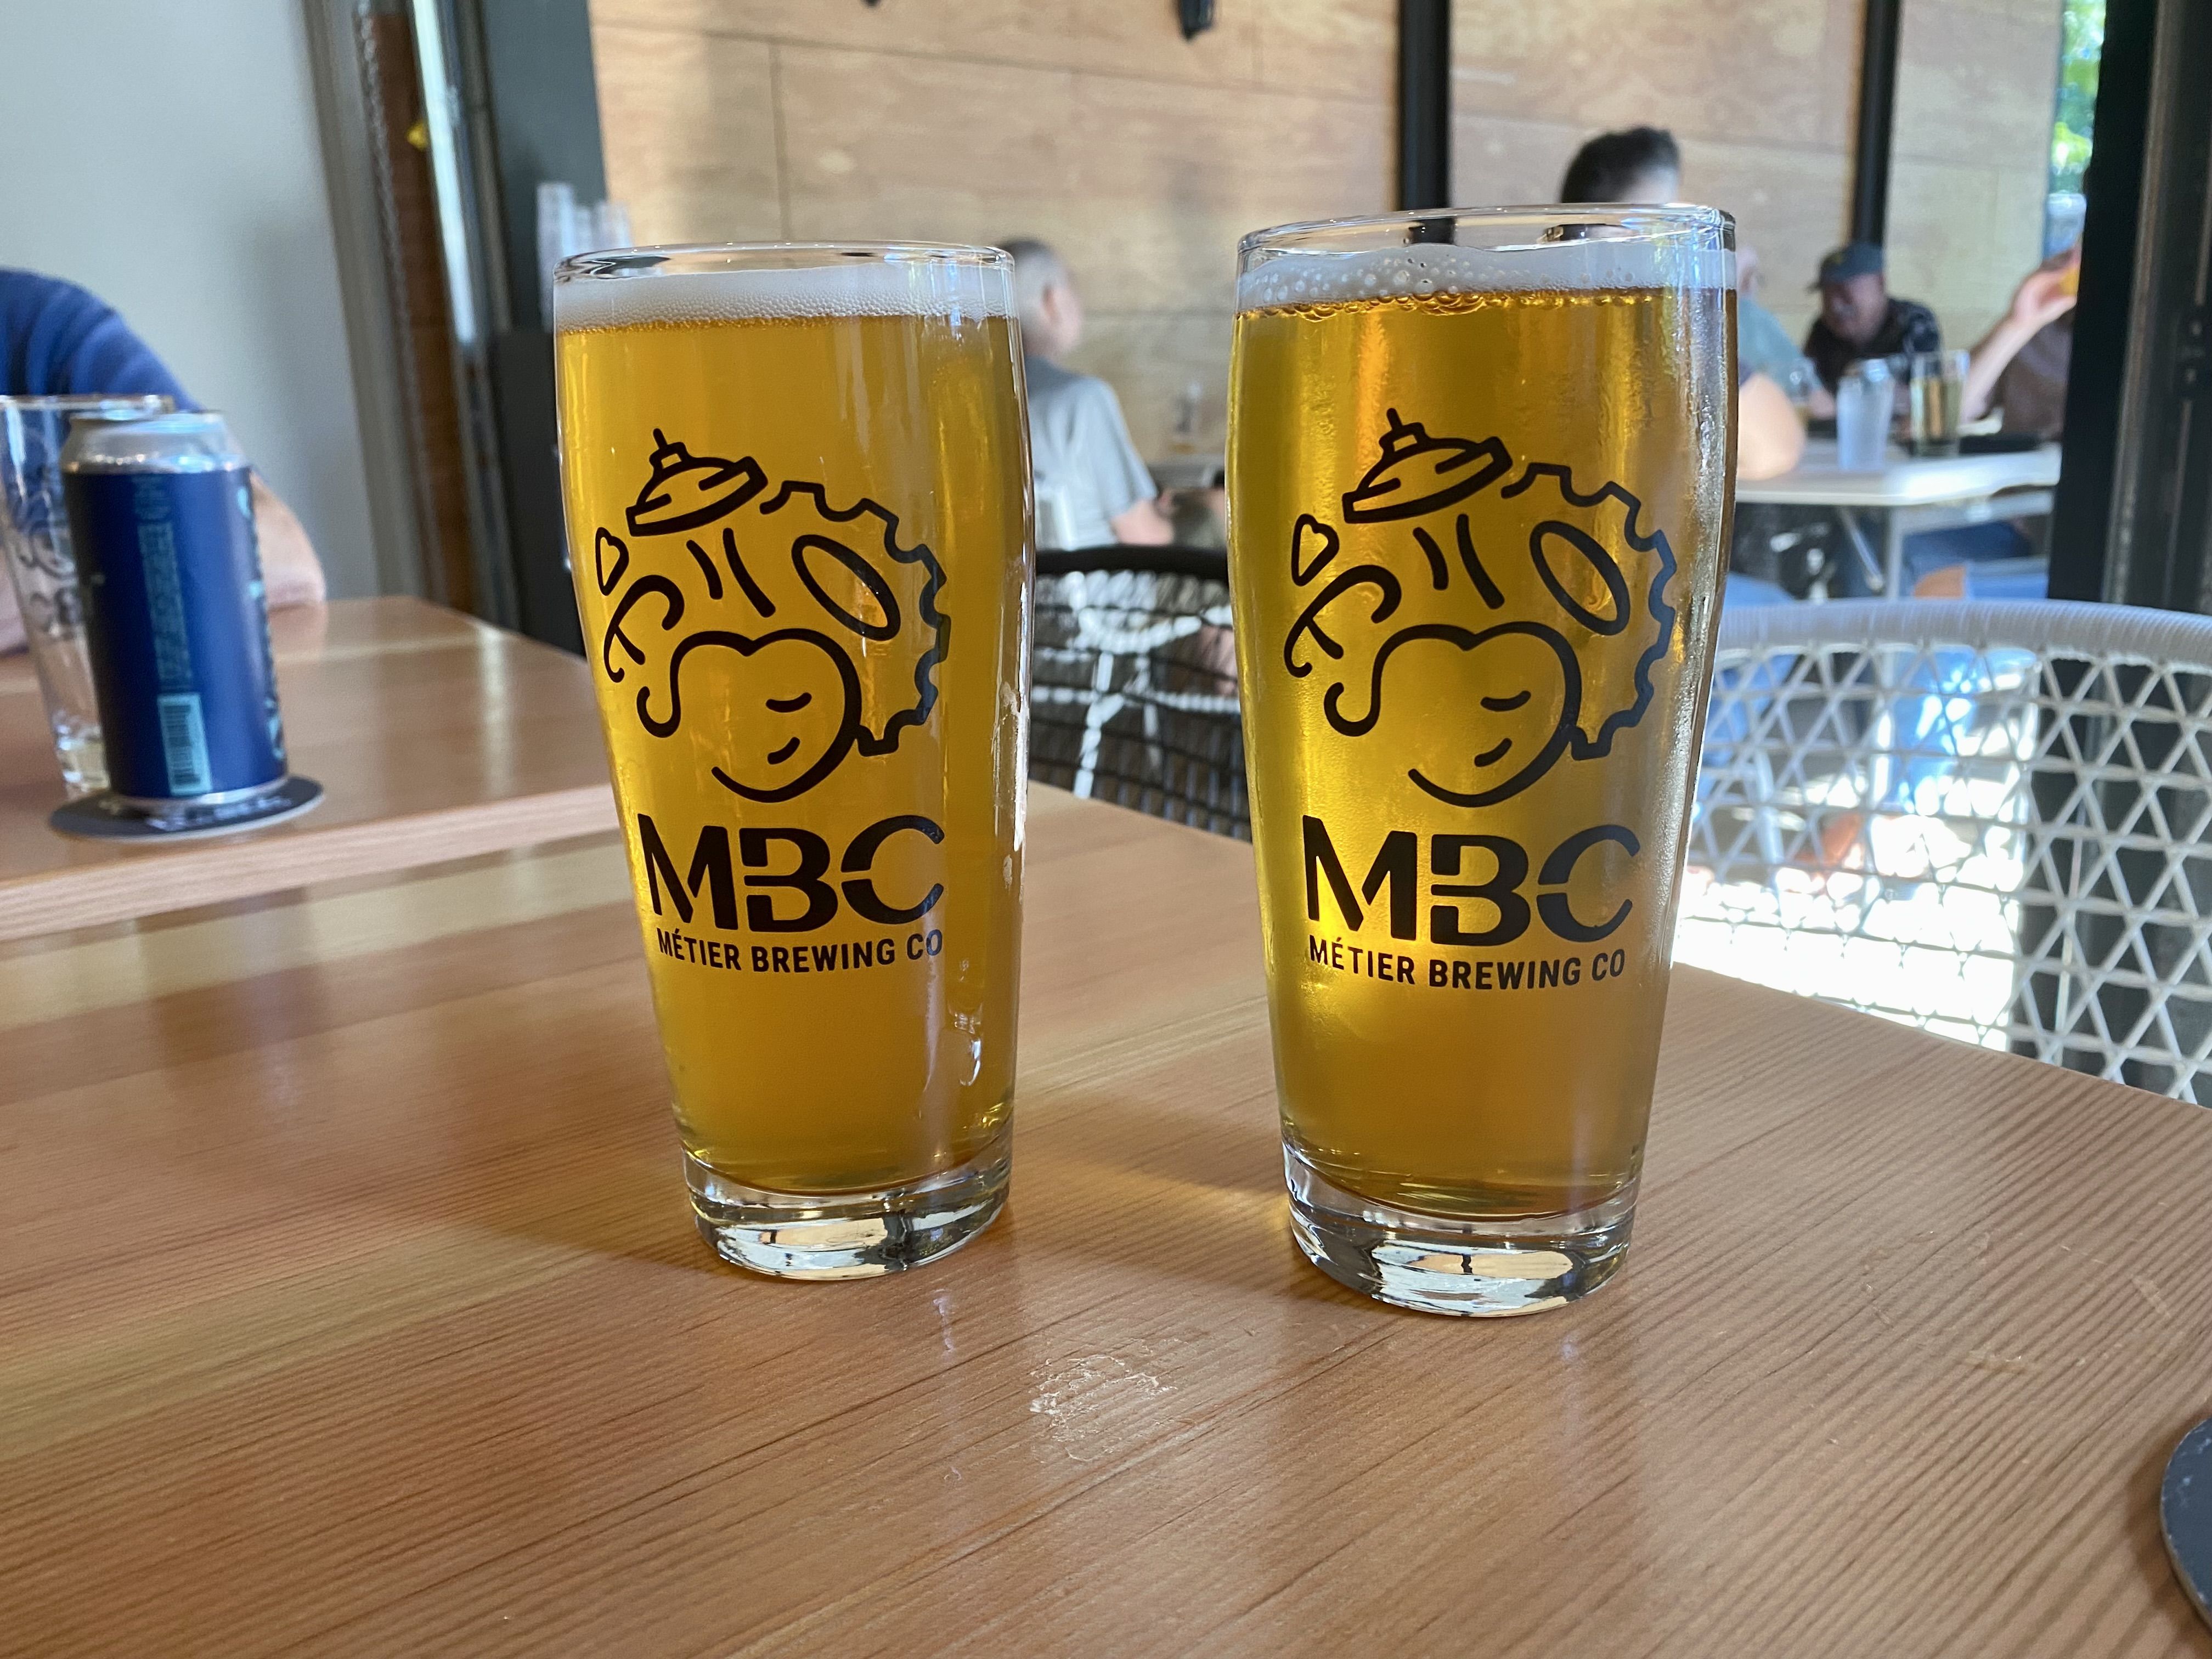 Two tall glasses of beer with label MBC on them.